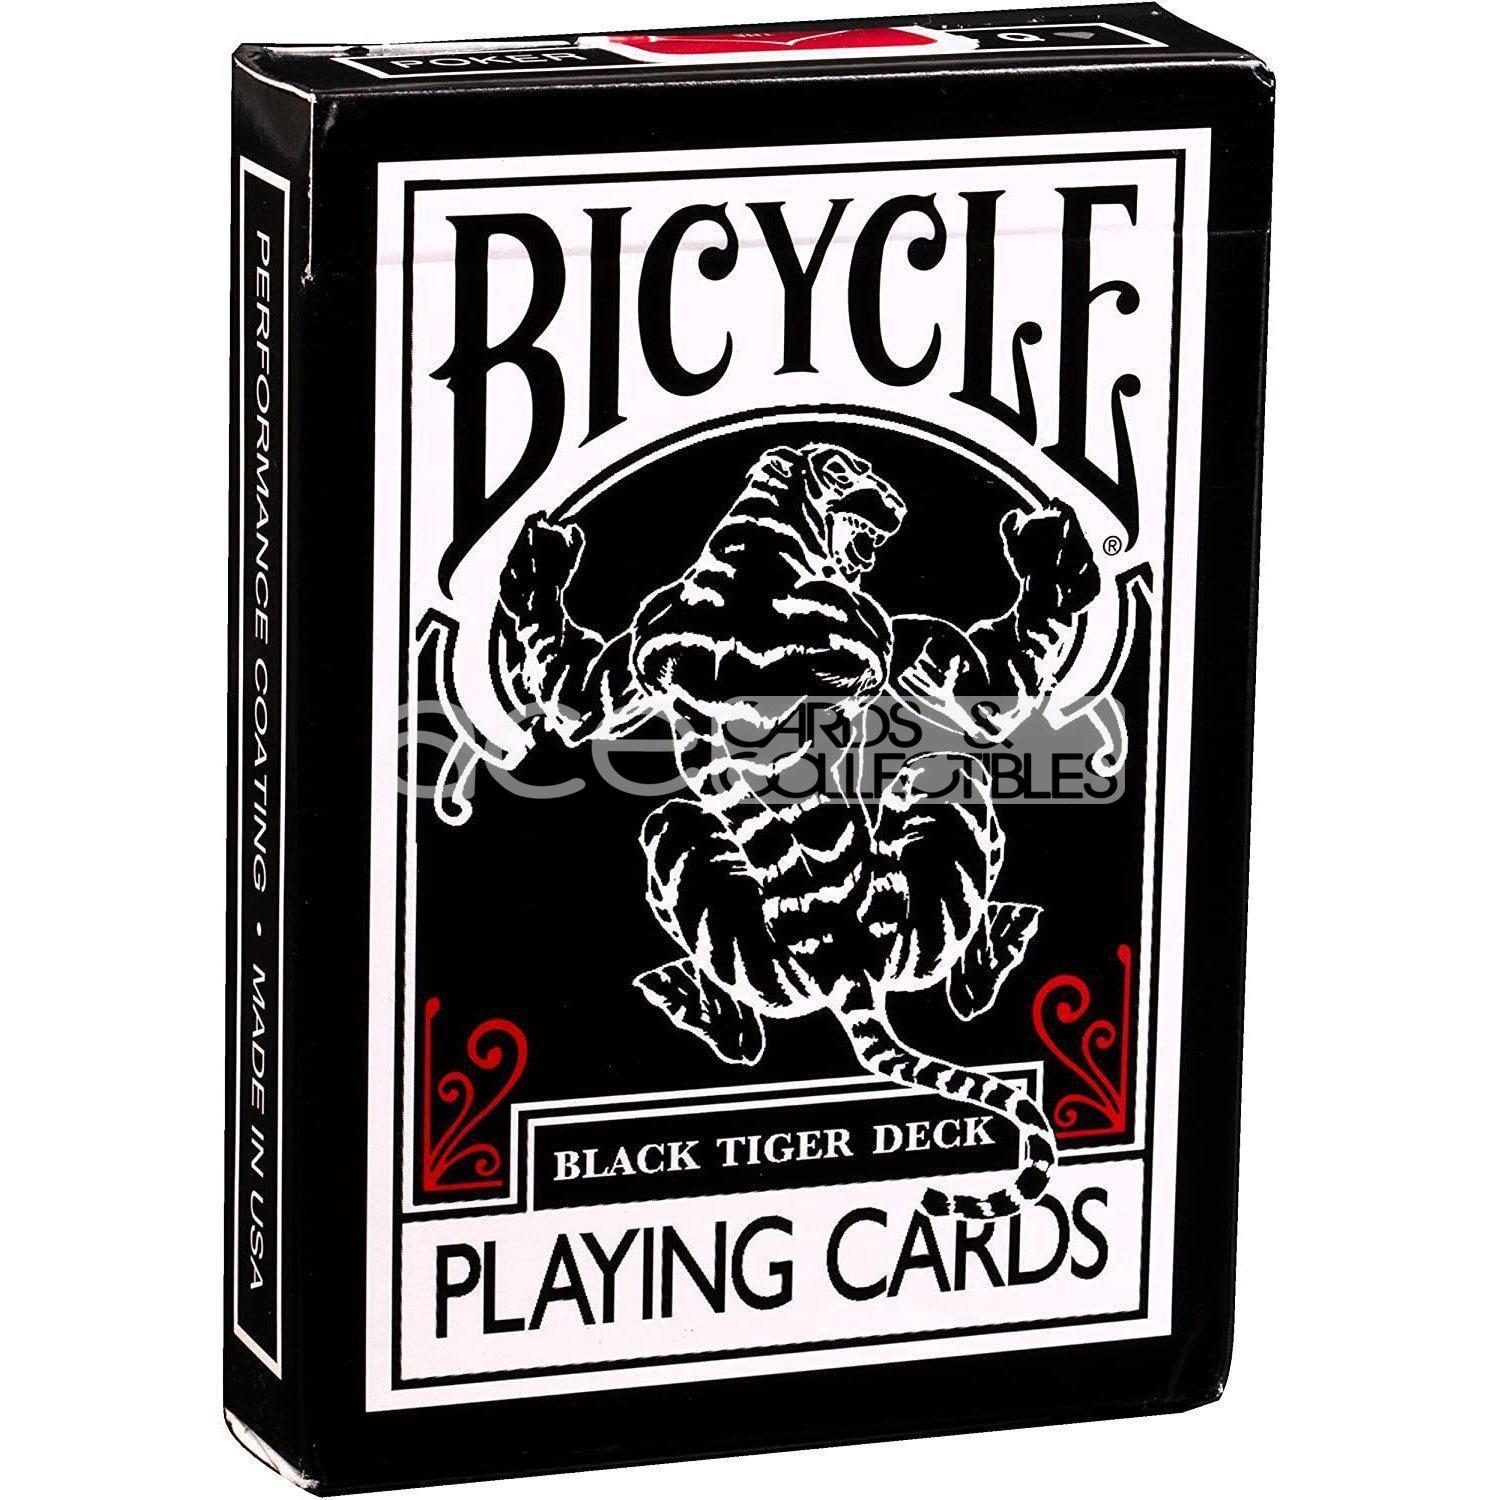 Bicycle Black Tiger Deck Playing Cards-United States Playing Cards Company-Ace Cards & Collectibles